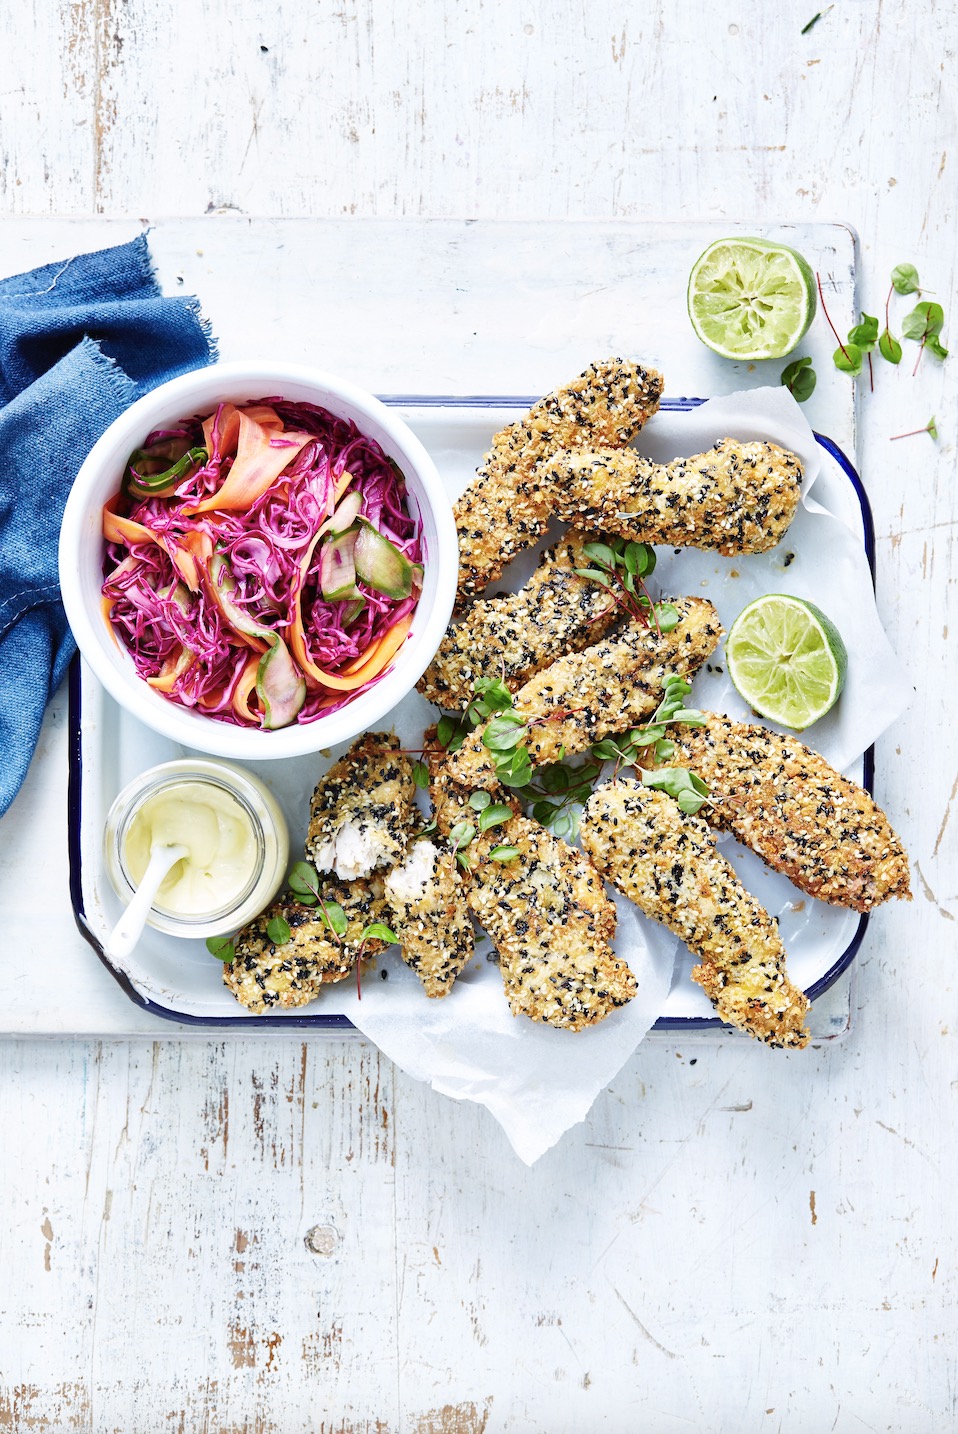 Sesame-crusted chicken with 'quickled' slaw